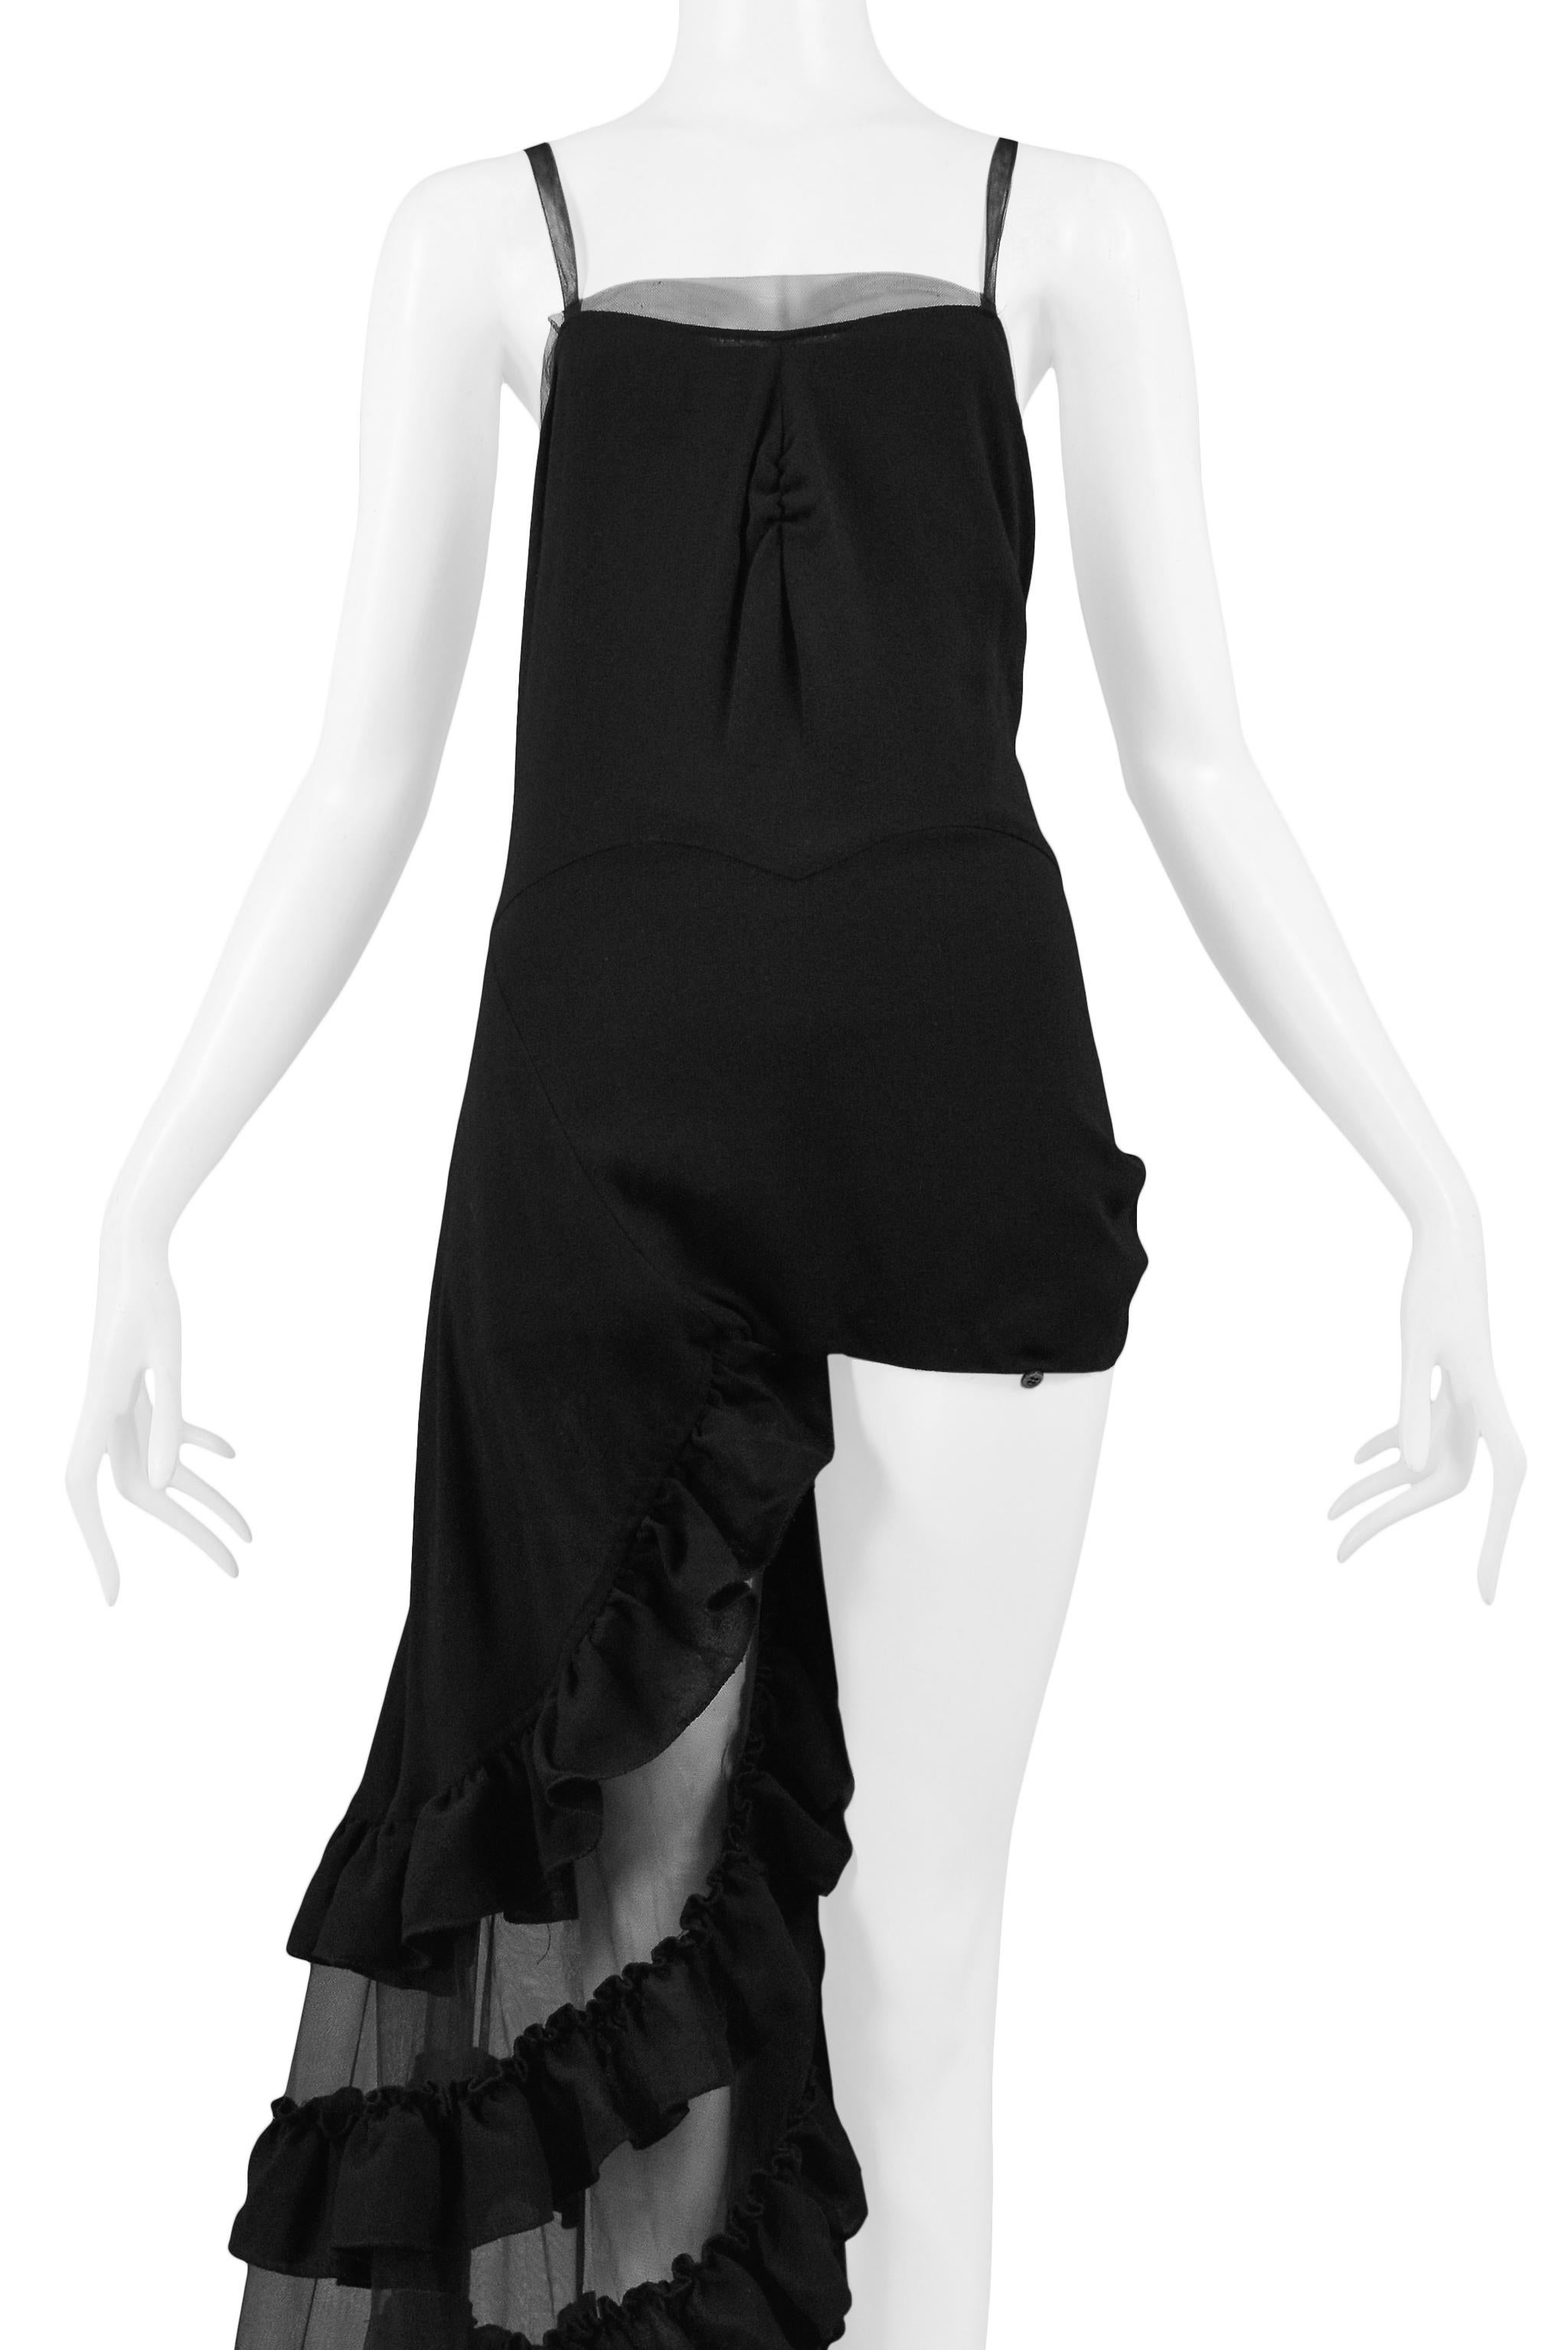 We are excited to offer this iconic black Alexander McQueen one-legged evening gown from the SS 'NO. 13', 1999 runway collection. The gown's wrap skirt can be buttoned to expose one leg or buttoned to create a full skirt (both legs covered). Shown